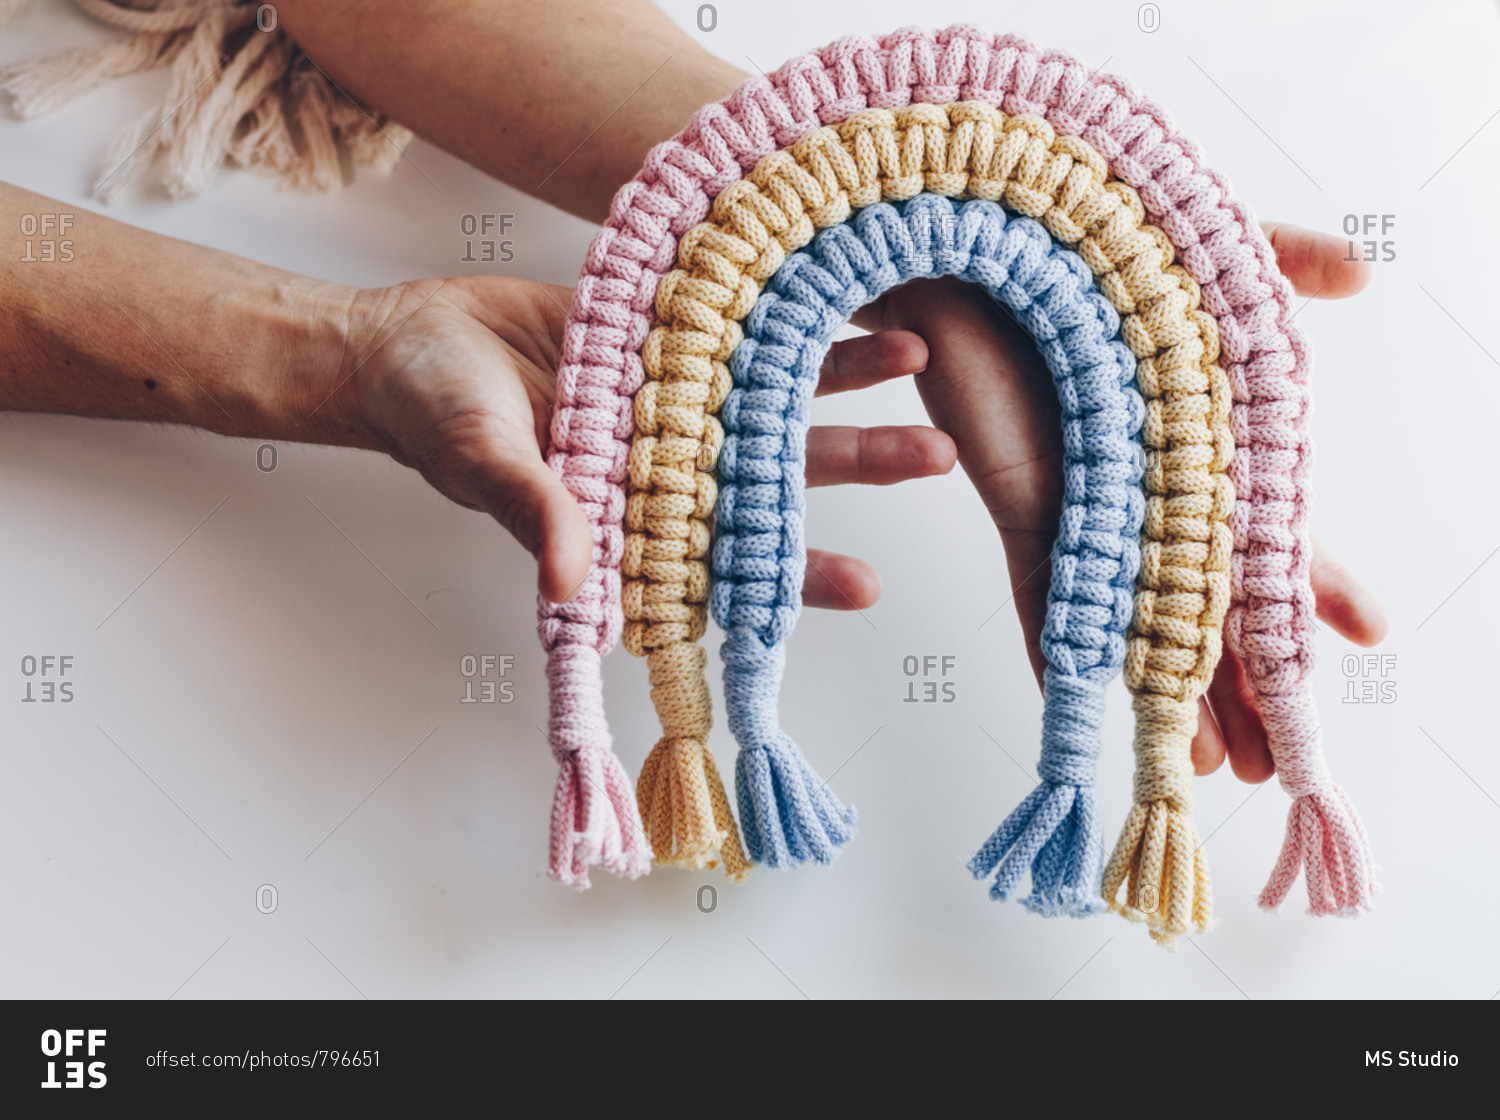 Top view close up of female hands displaying a multicolored pink, yellow and blue macrame decor.